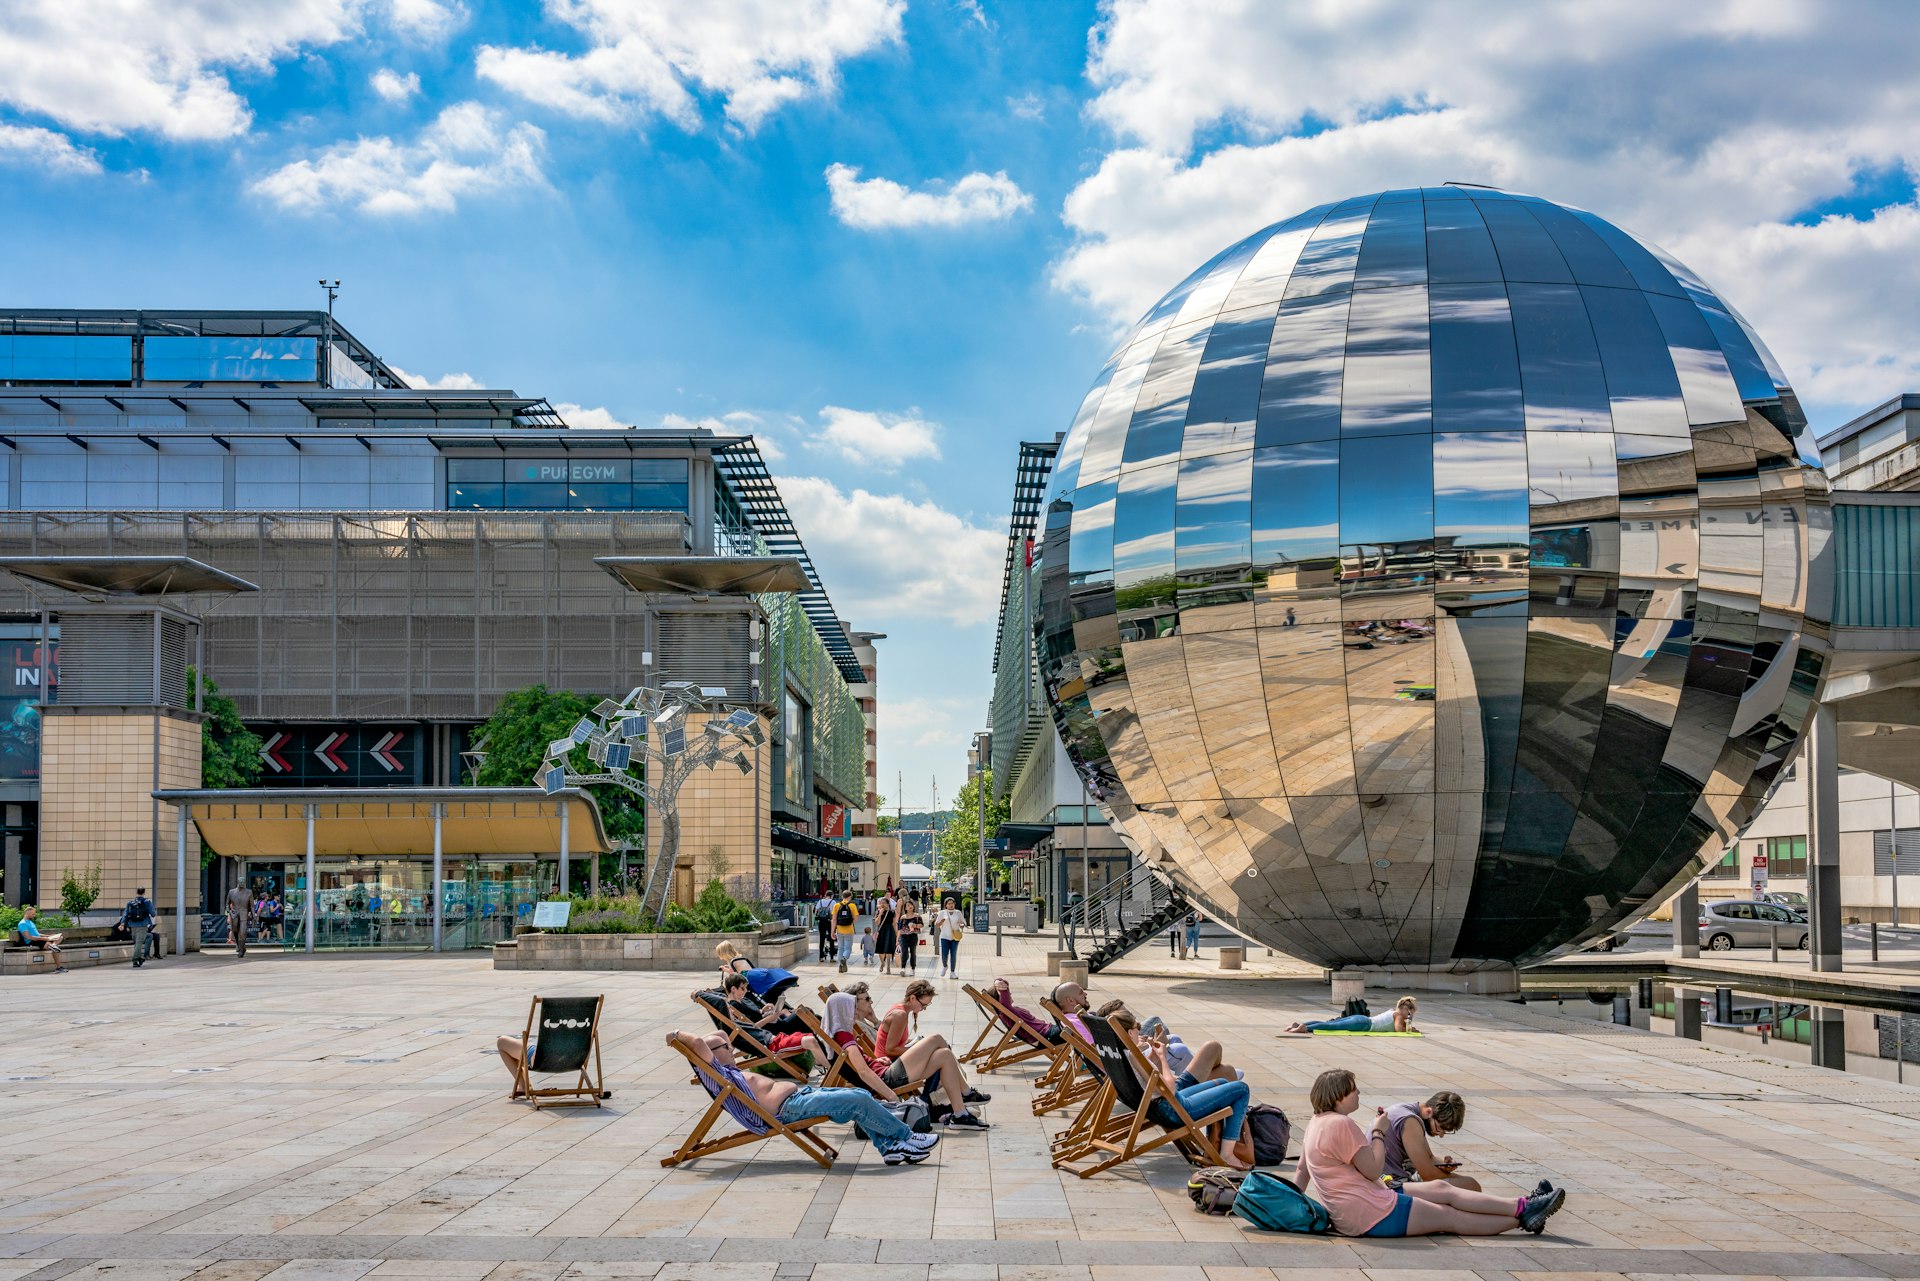 People sit in front of a large disco-ball-like sculpture at the We The Curious Museum in  Bristol